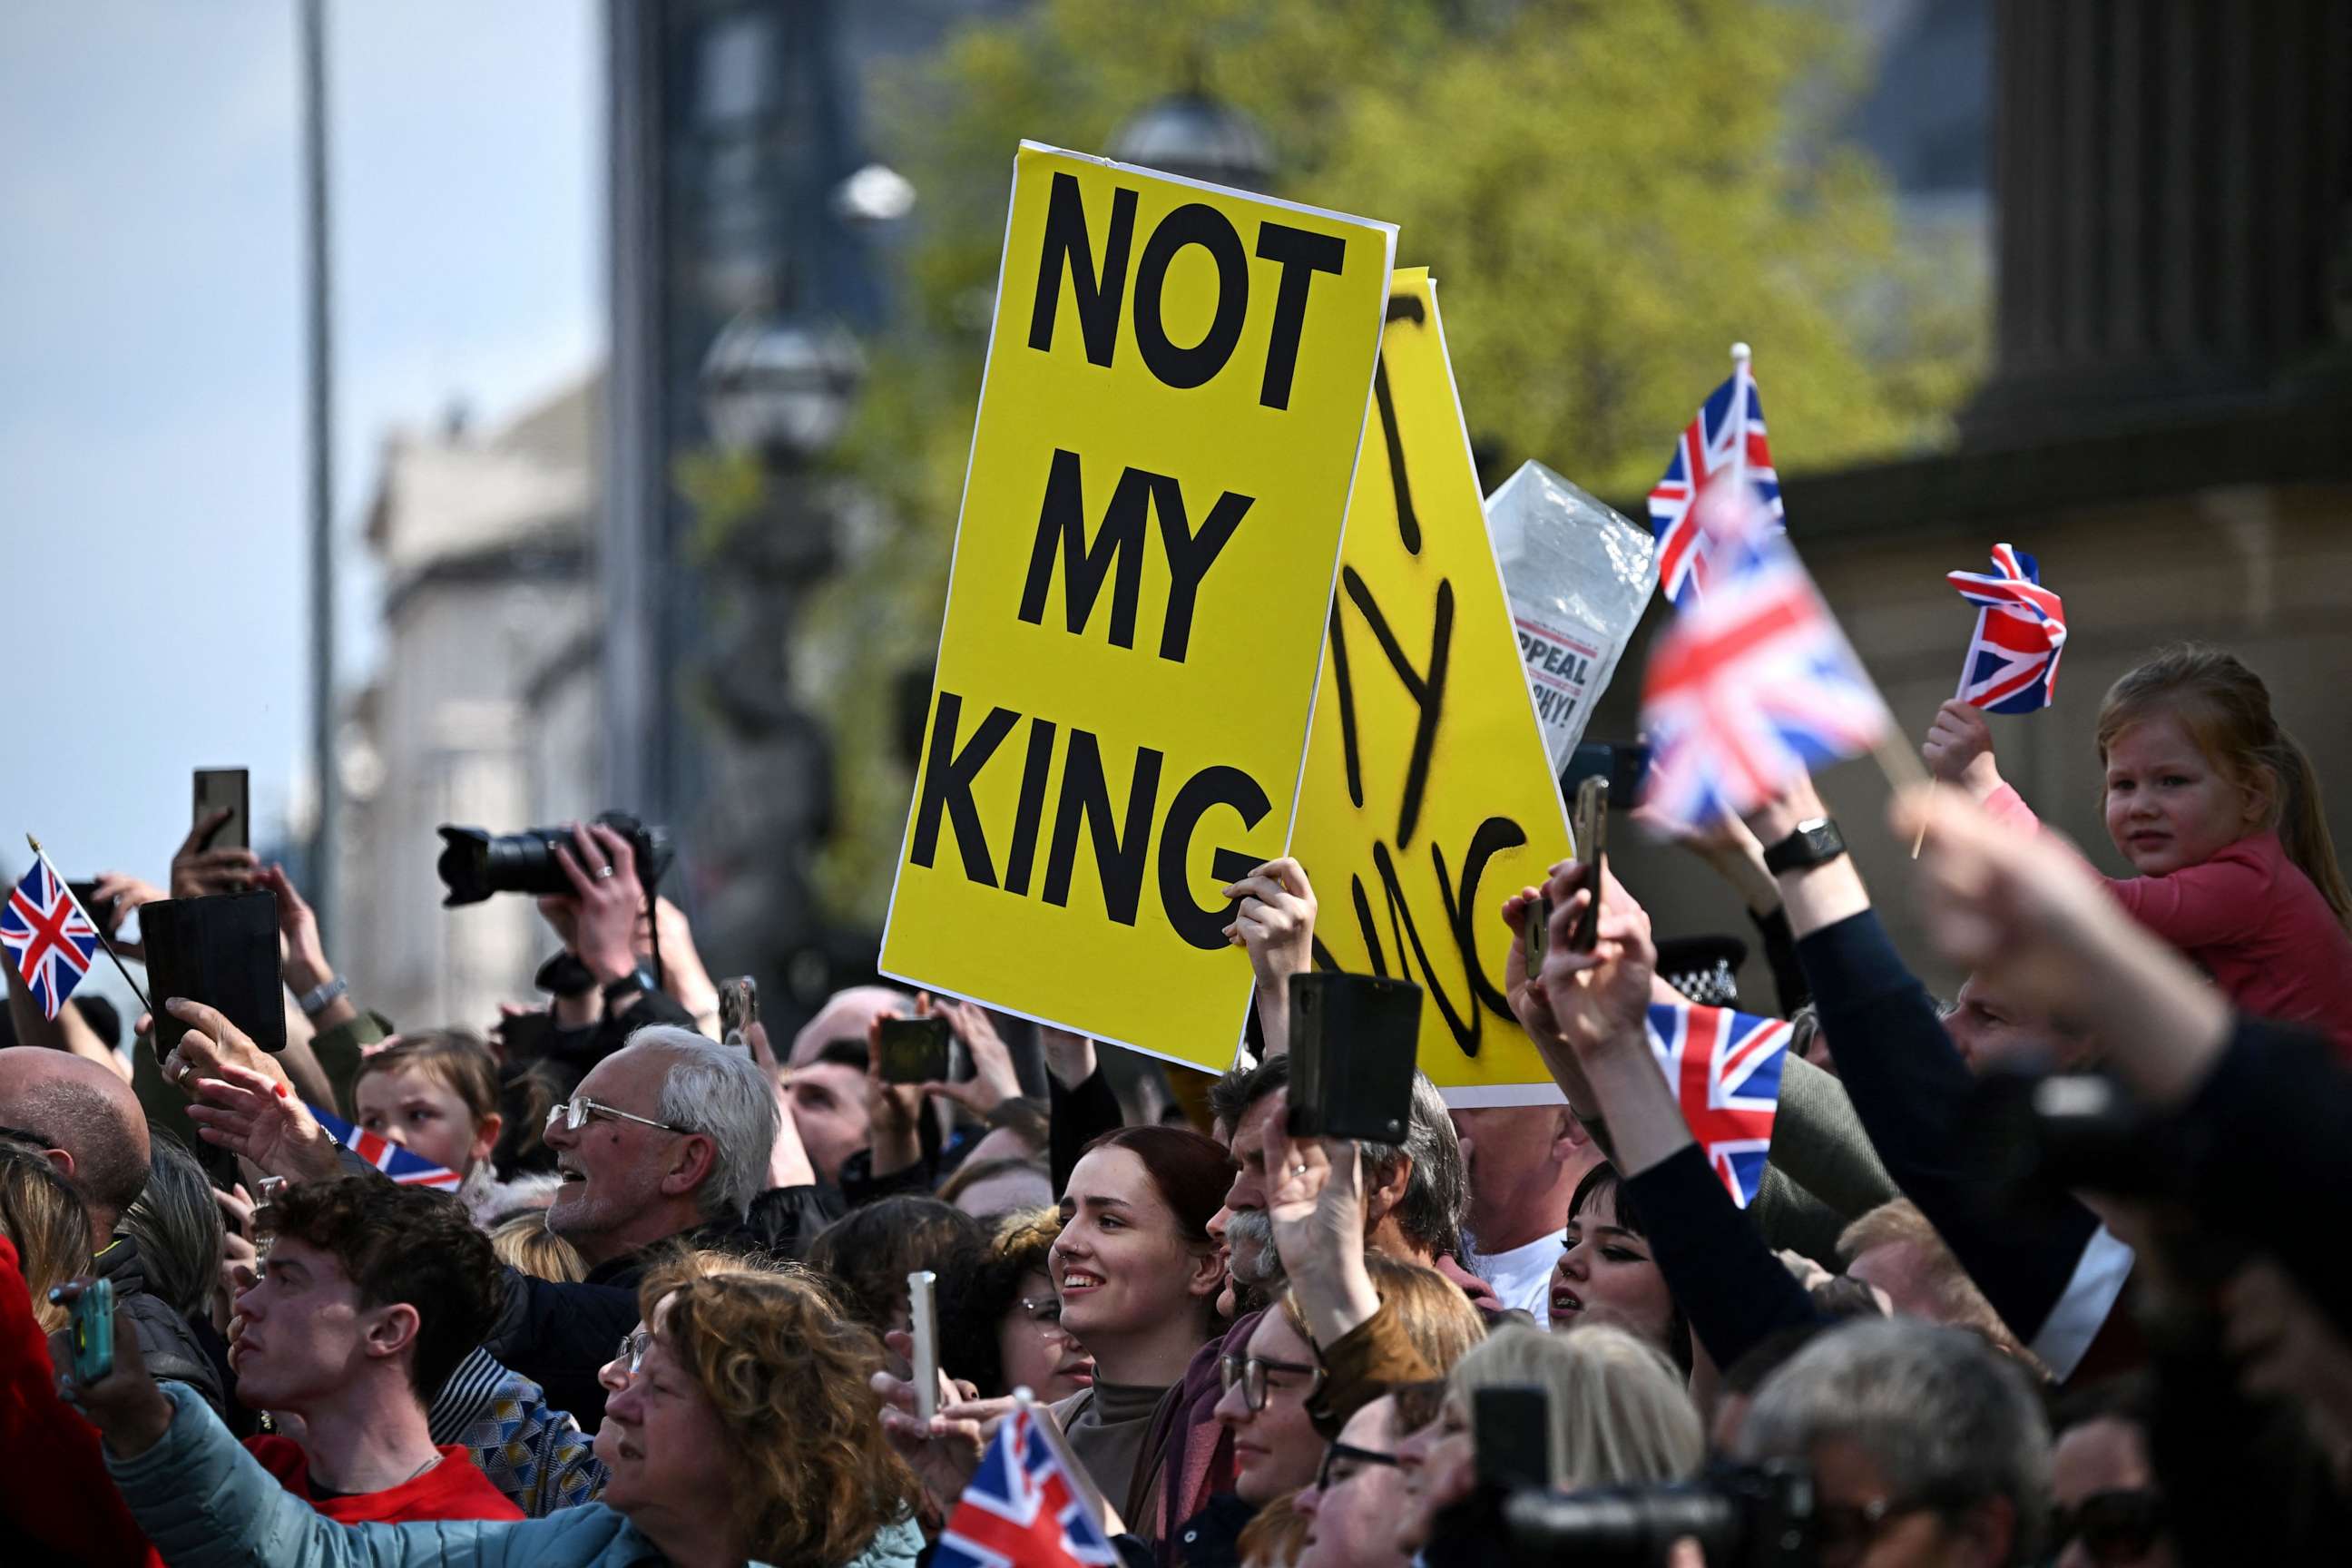 PHOTO: Protesters hold signs reading "Not My King" ahead of the arrival of Britain's King Charles III and Britain's Queen Consort Camilla for a visit to the Liverpool Central Library on April 26, 2023.